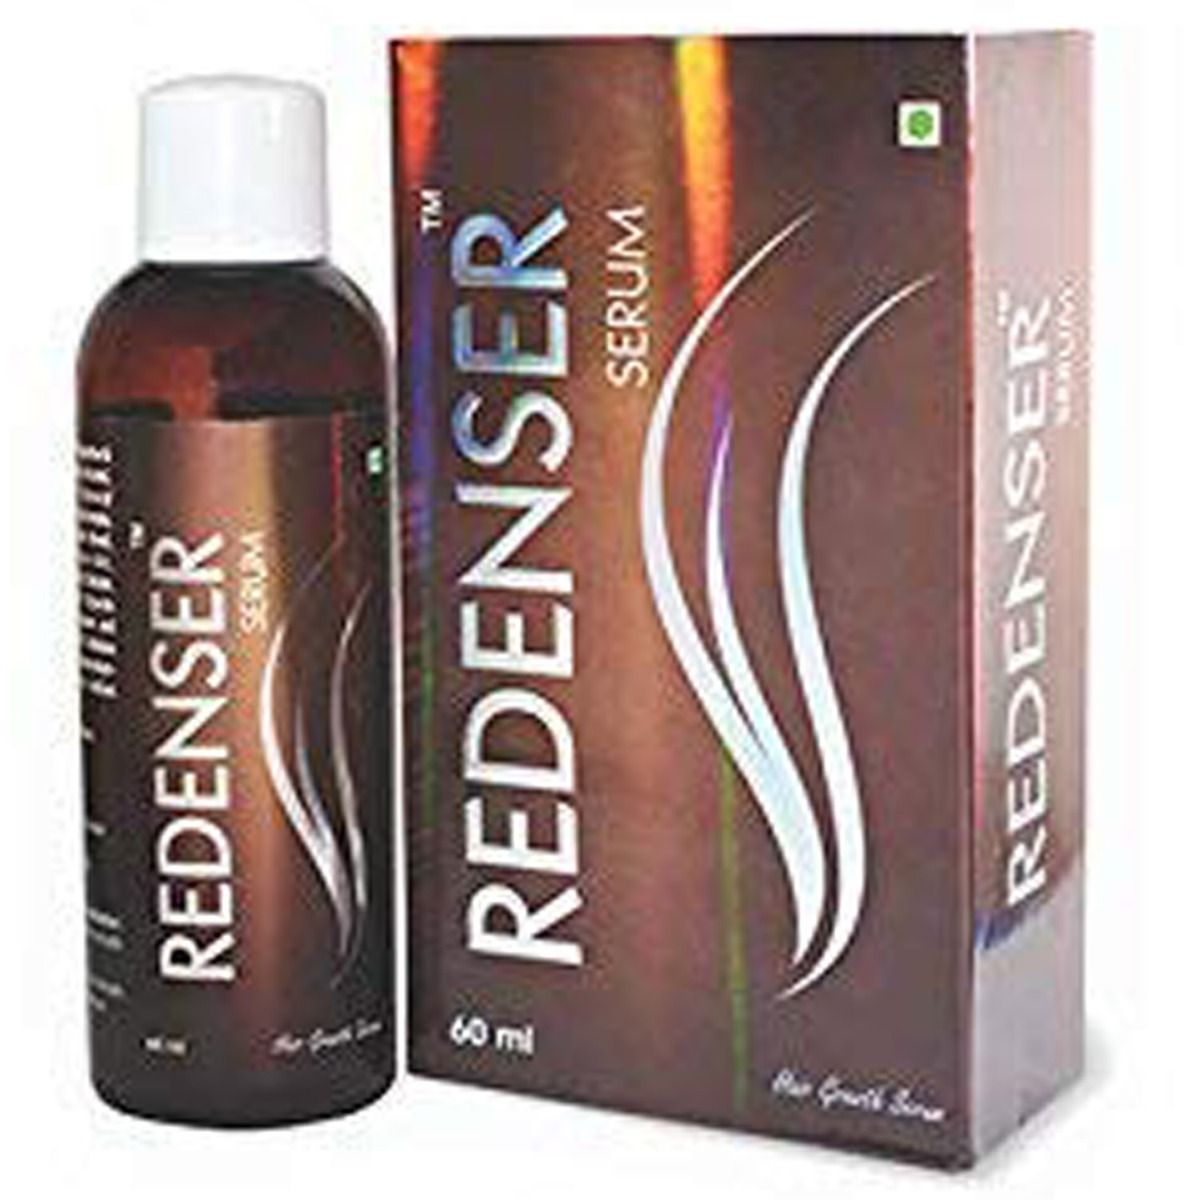 Redenser Serum 60 ml Price, Uses, Side Effects, Composition - Apollo  Pharmacy